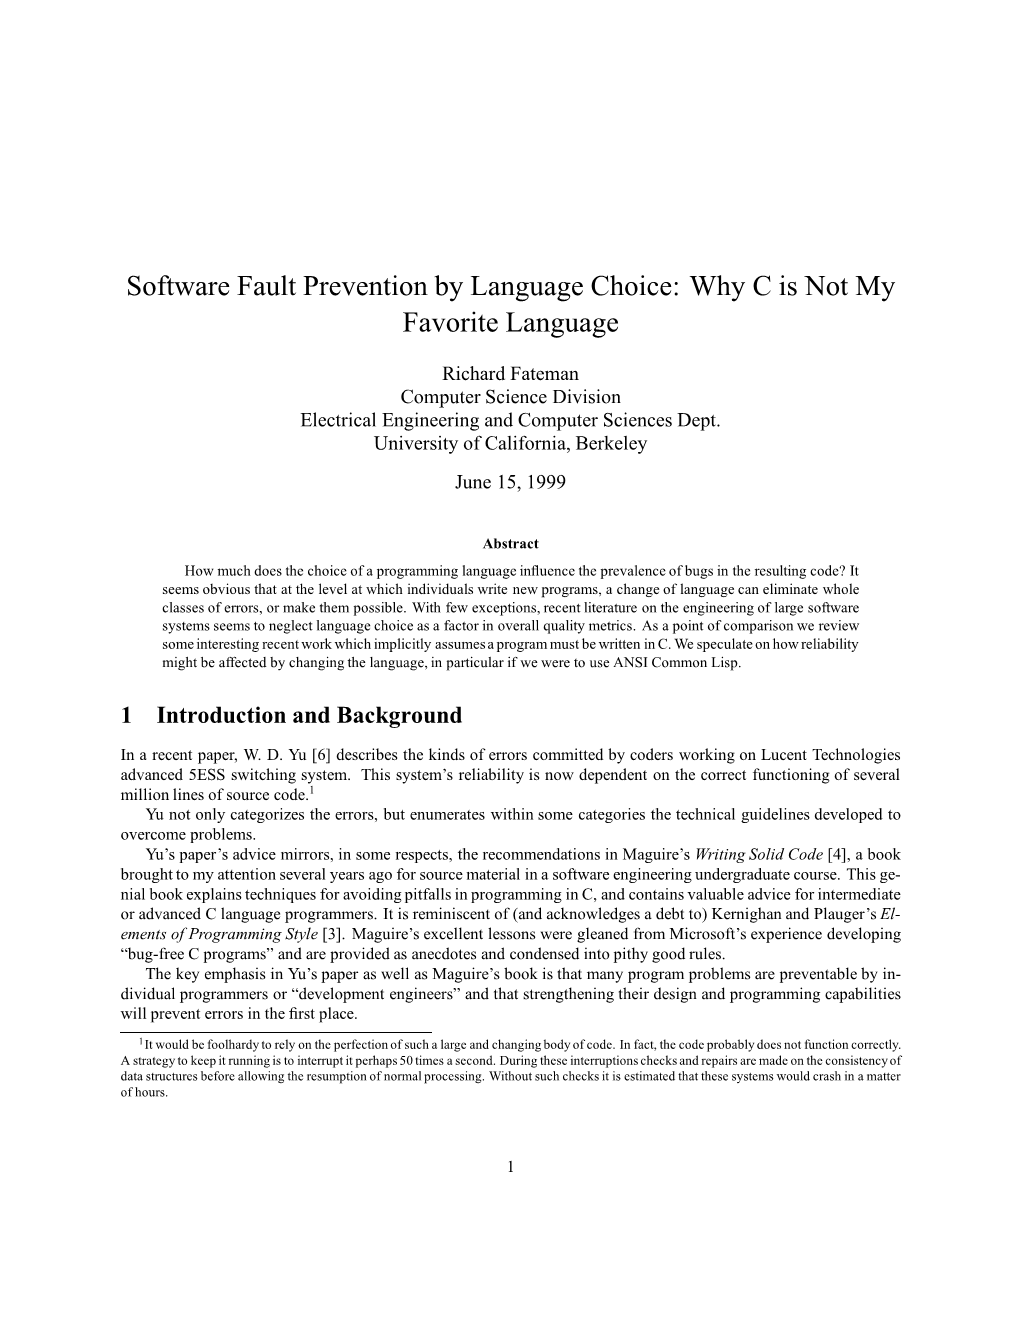 Software Fault Prevention by Language Choice: Why C Is Not My Favorite Language